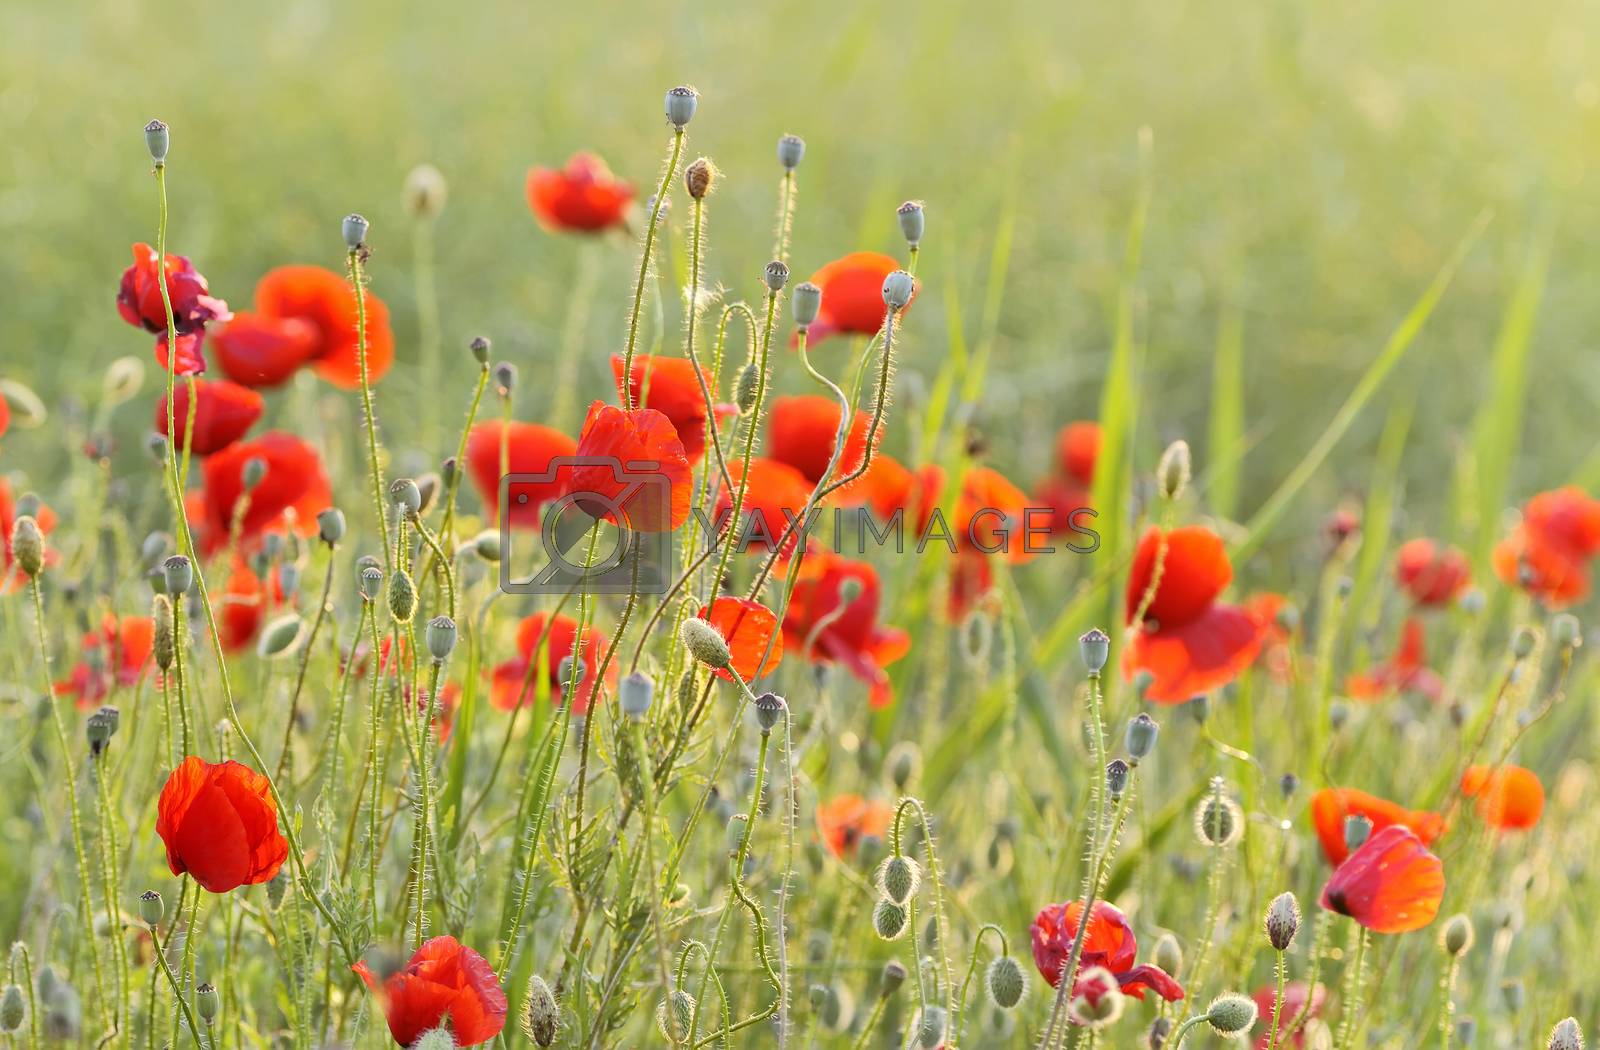 Royalty free image of red poppy field by mady70